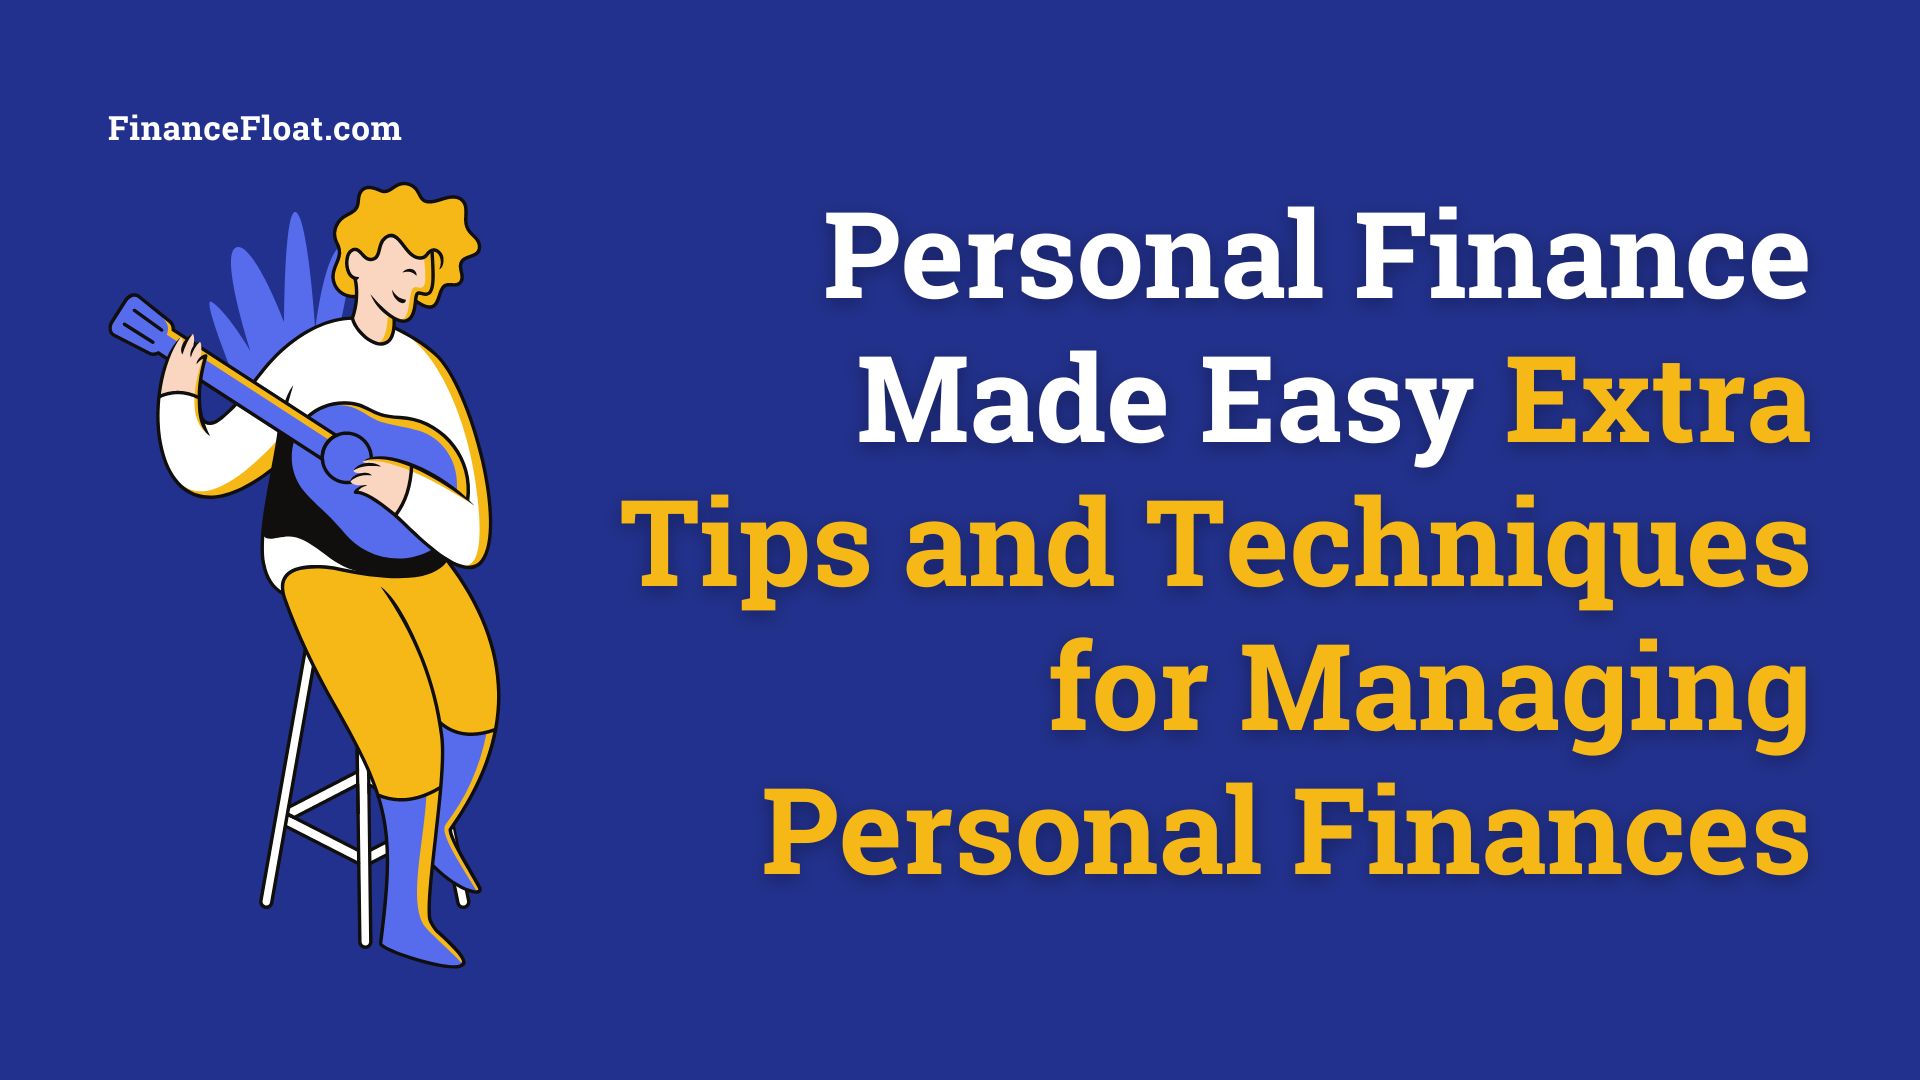 Personal Finance Made Easy Extra Tips and Techniques for Managing Personal Finances